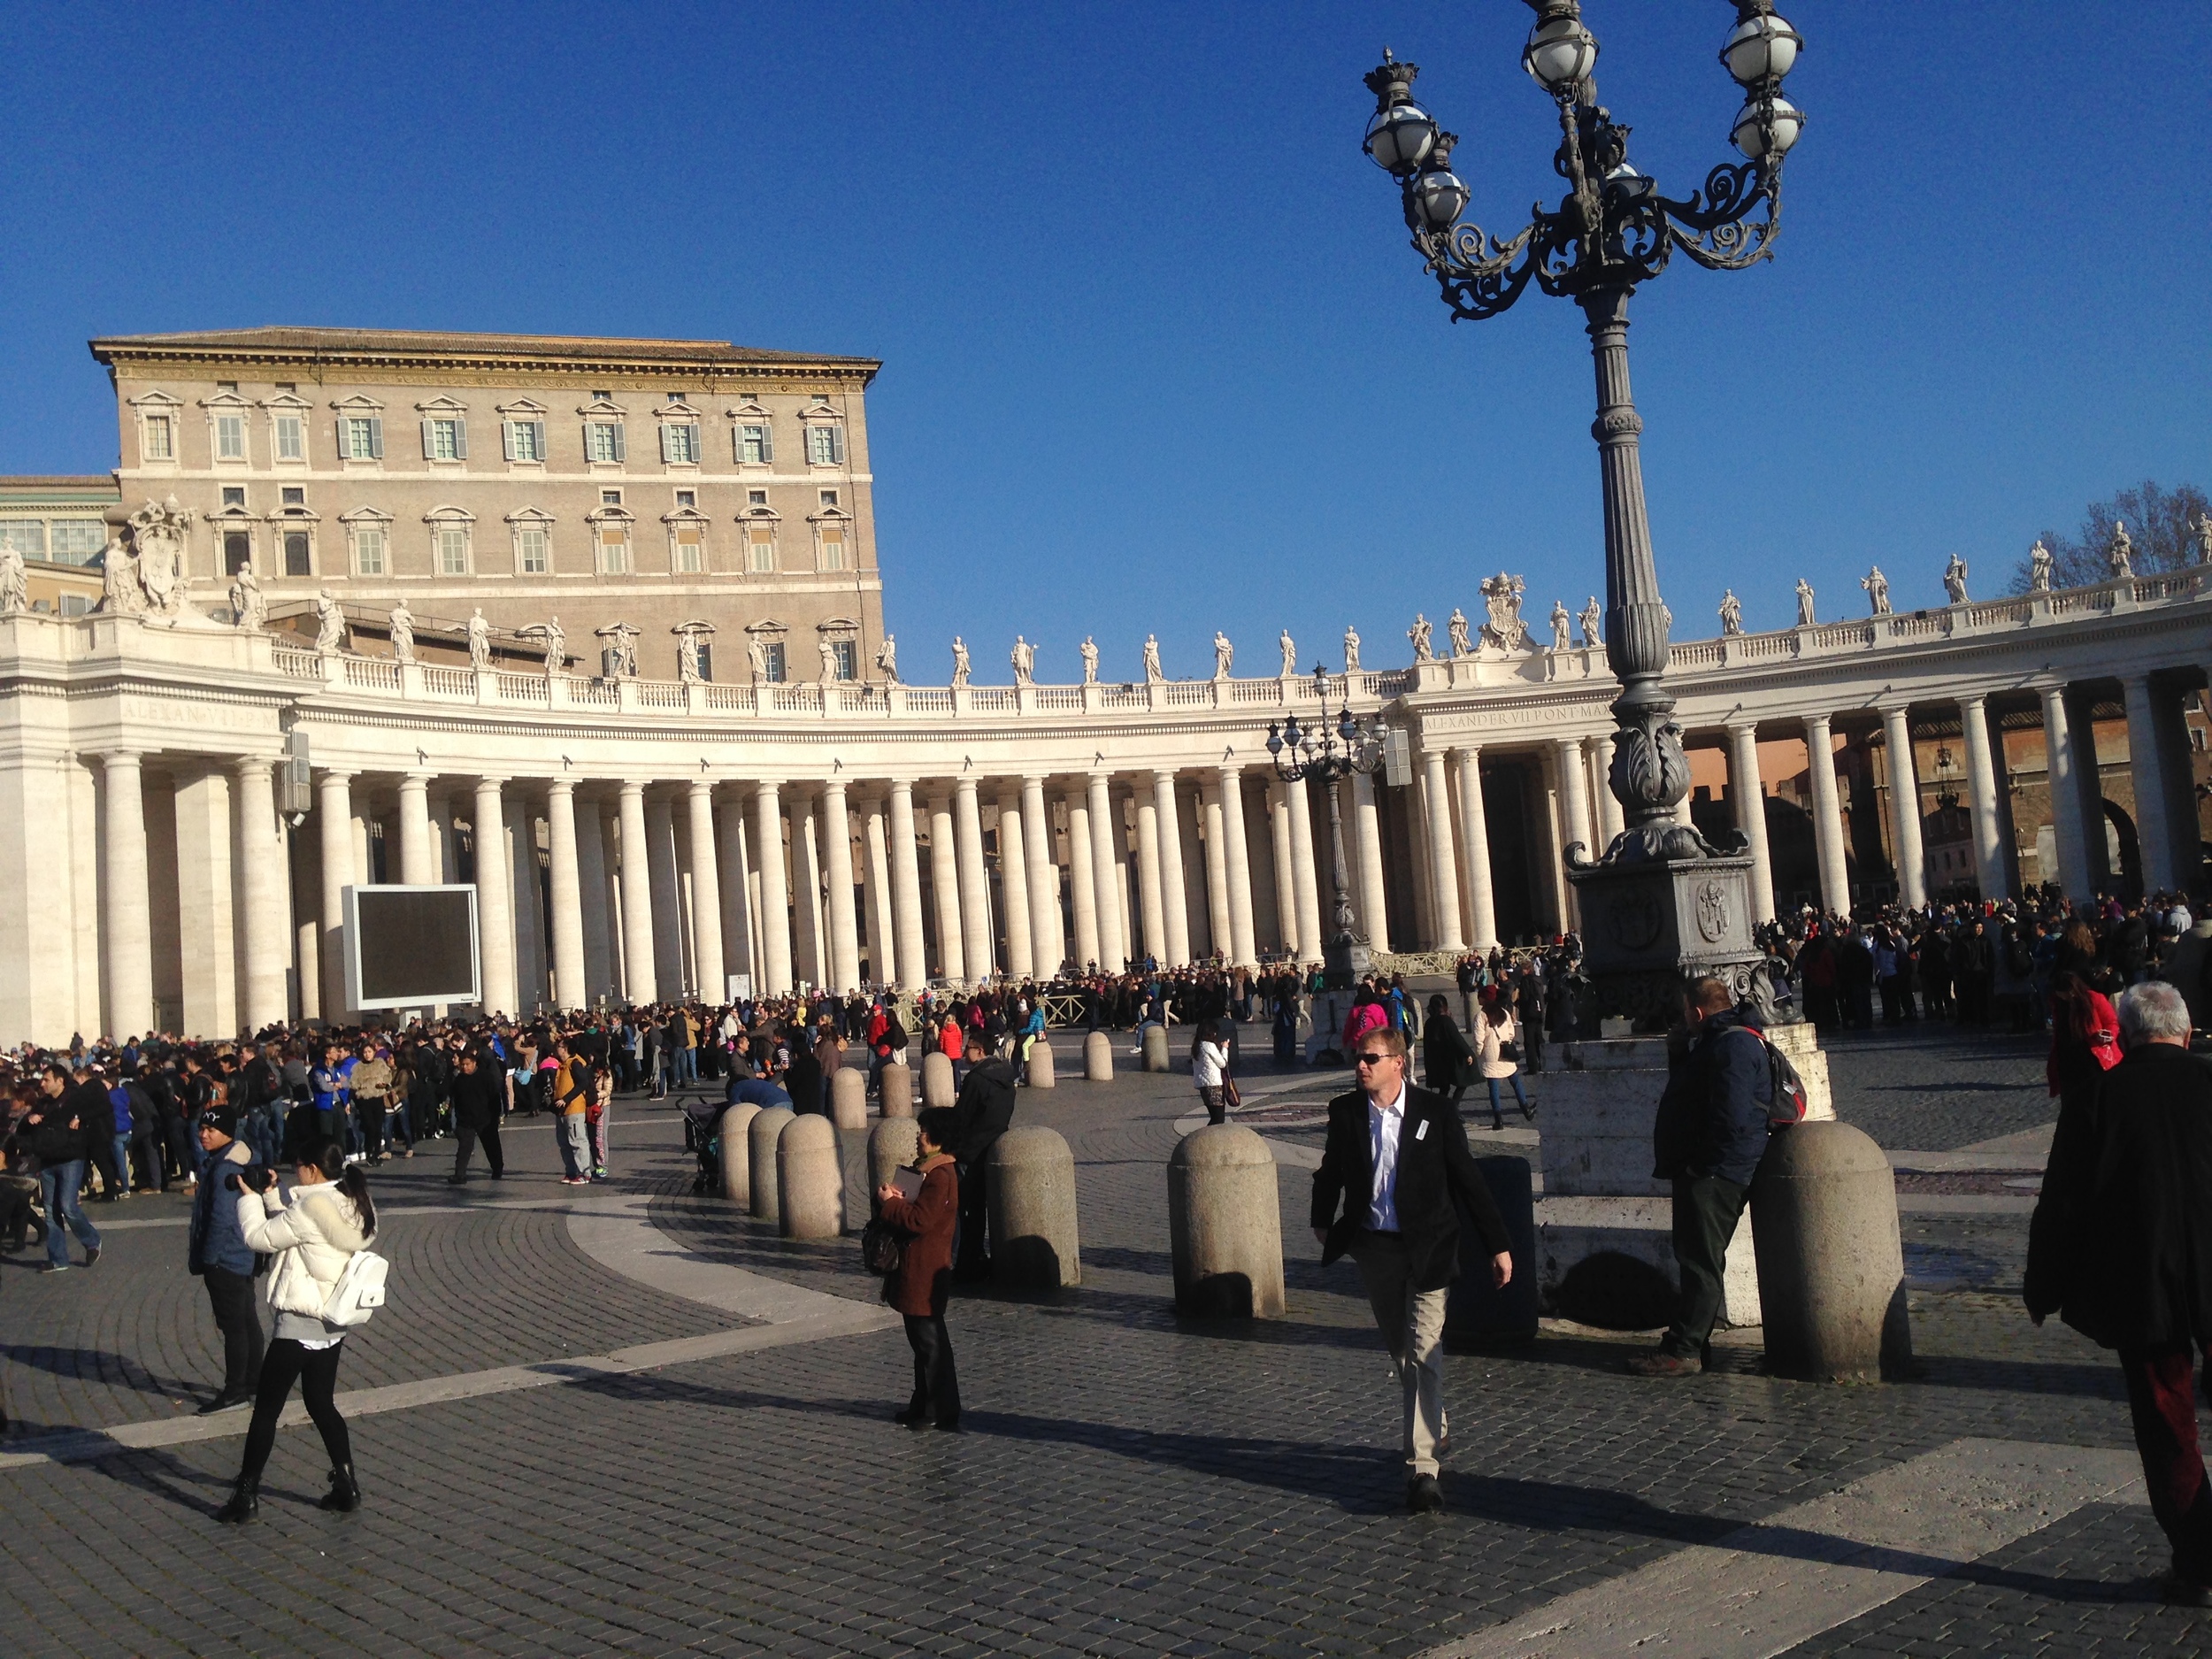 St. Peter's Square - The Vatican